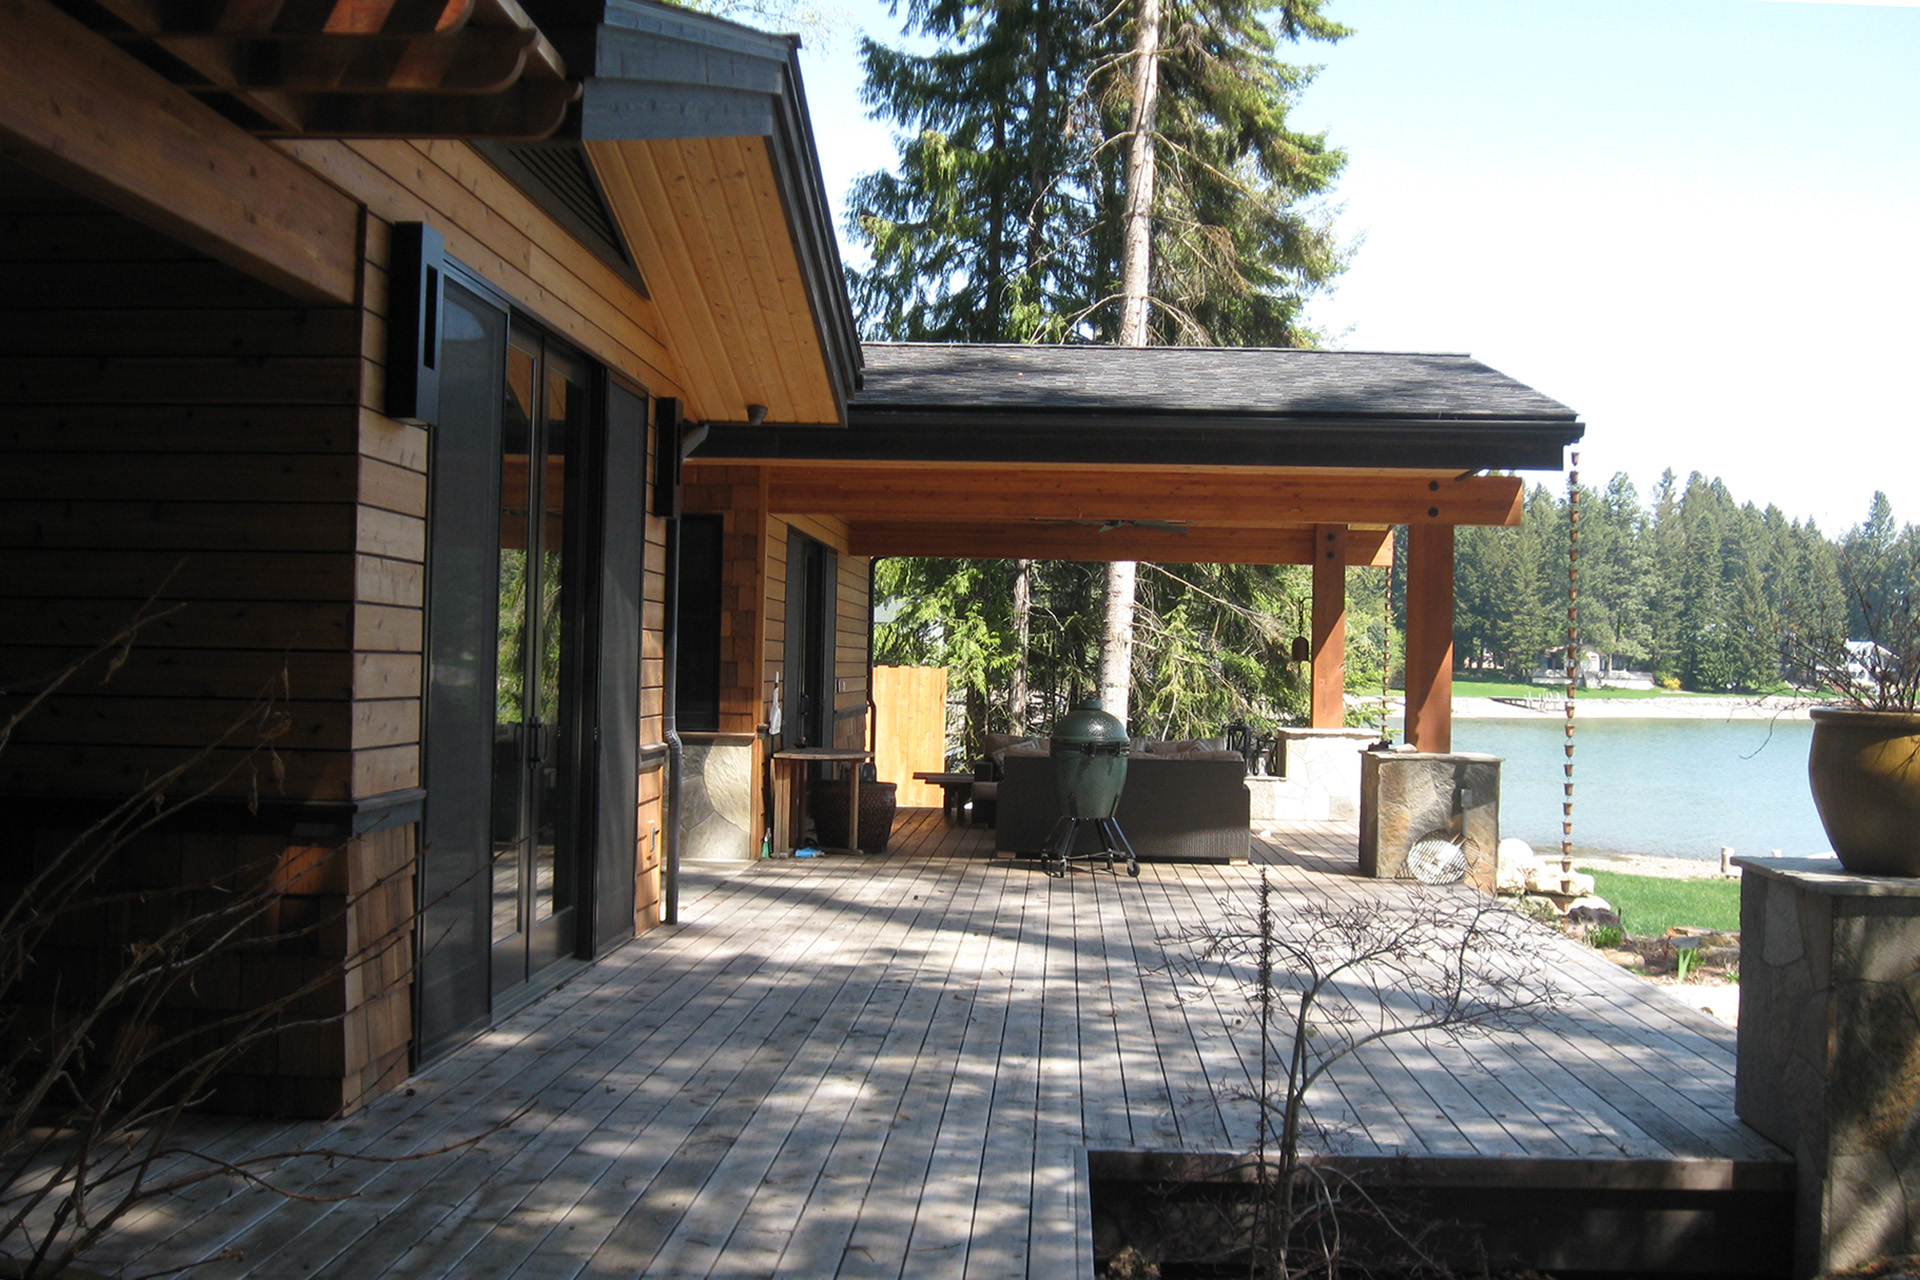 Sandpoint Builders, Inc. builds custom dream homes in North Idaho background image.